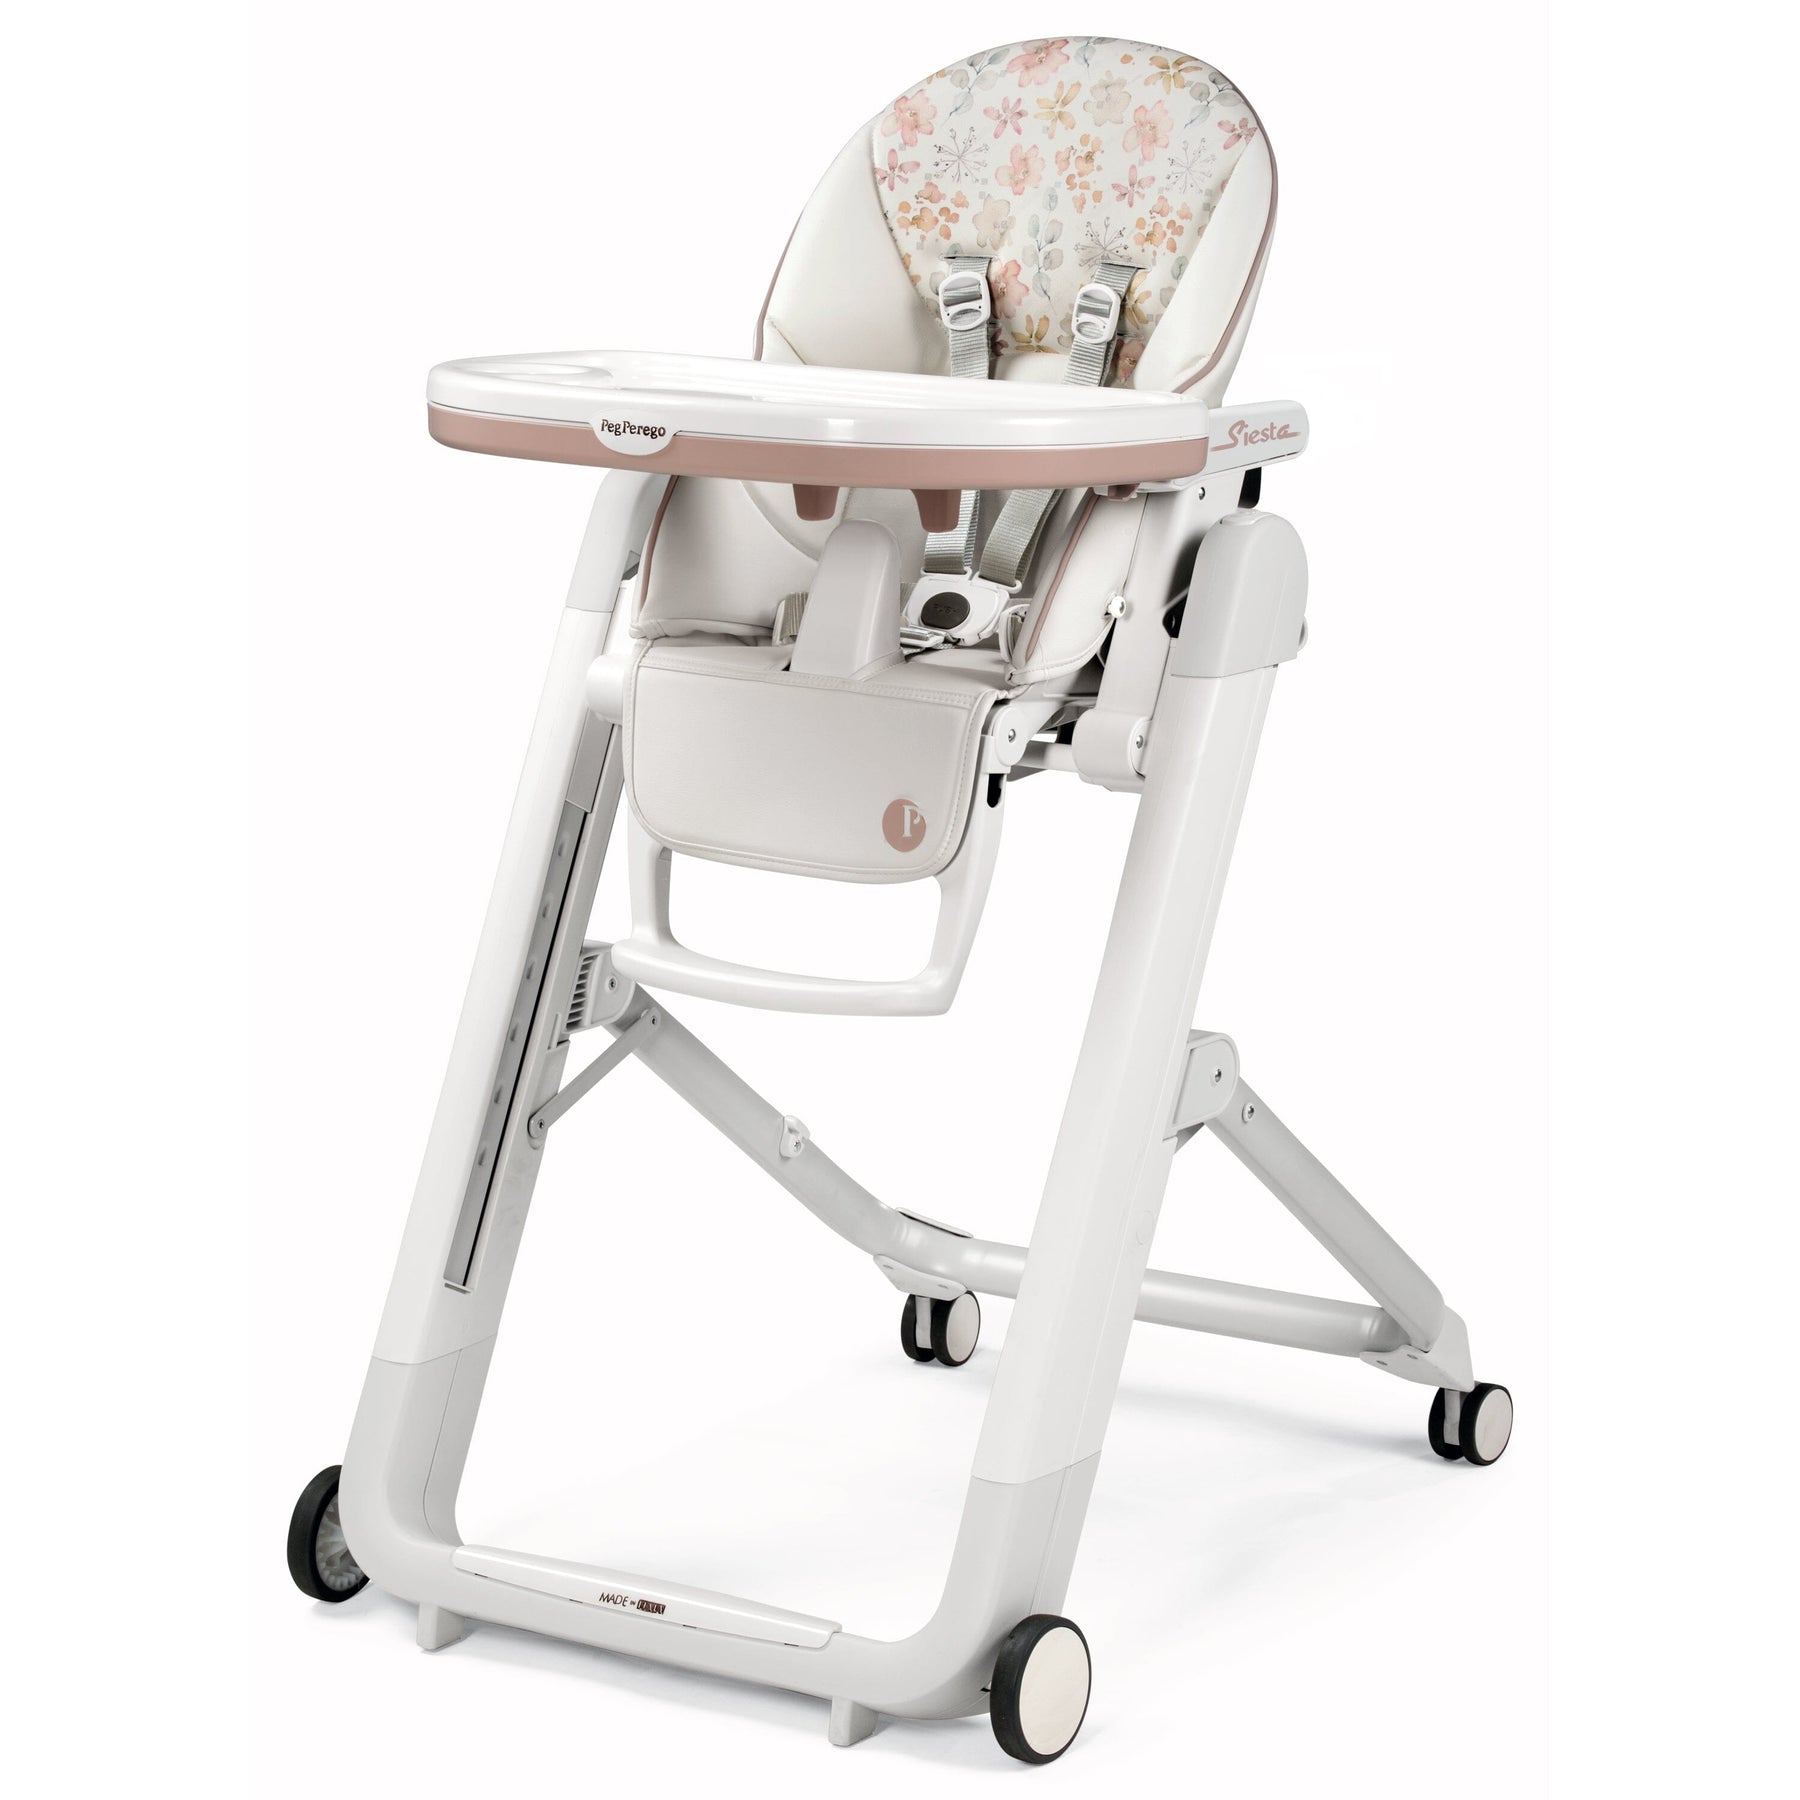 Siesta High Chair: Relaxation Elevated to New Heights插图4